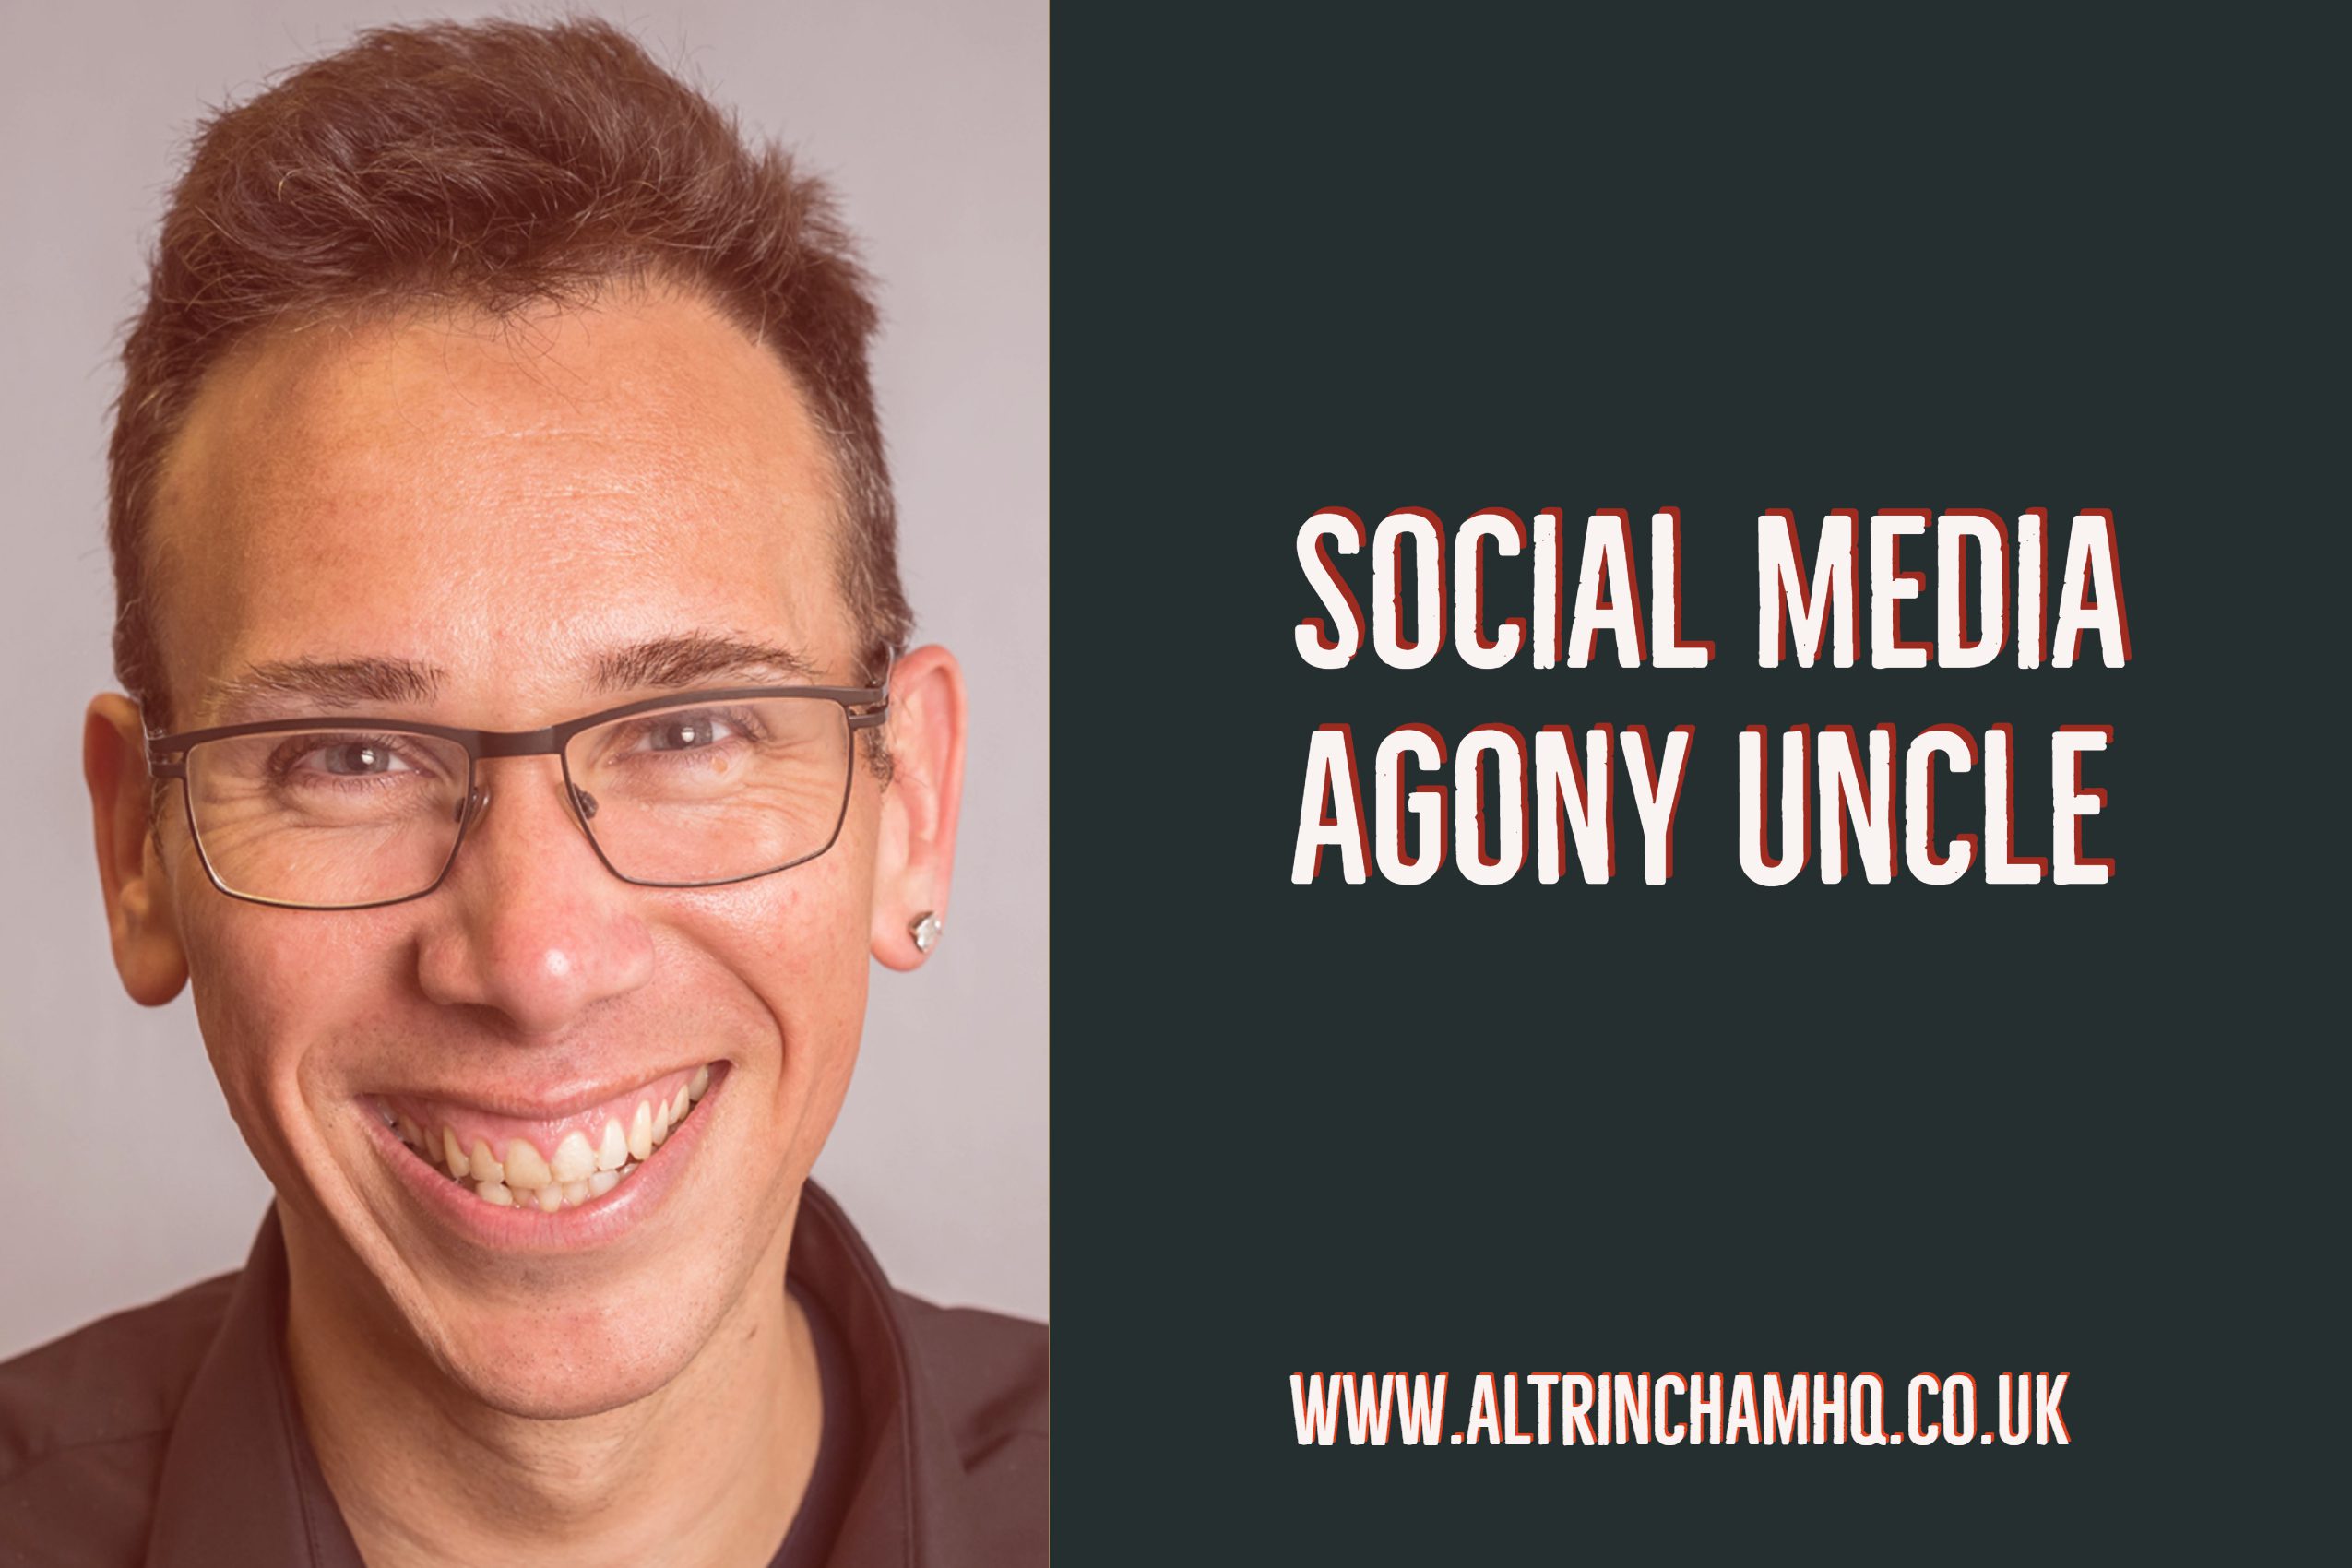 SOCIAL MEDIA AGONY UNCLE: Advice For Those Leaving University & Looking To Work In Marketing